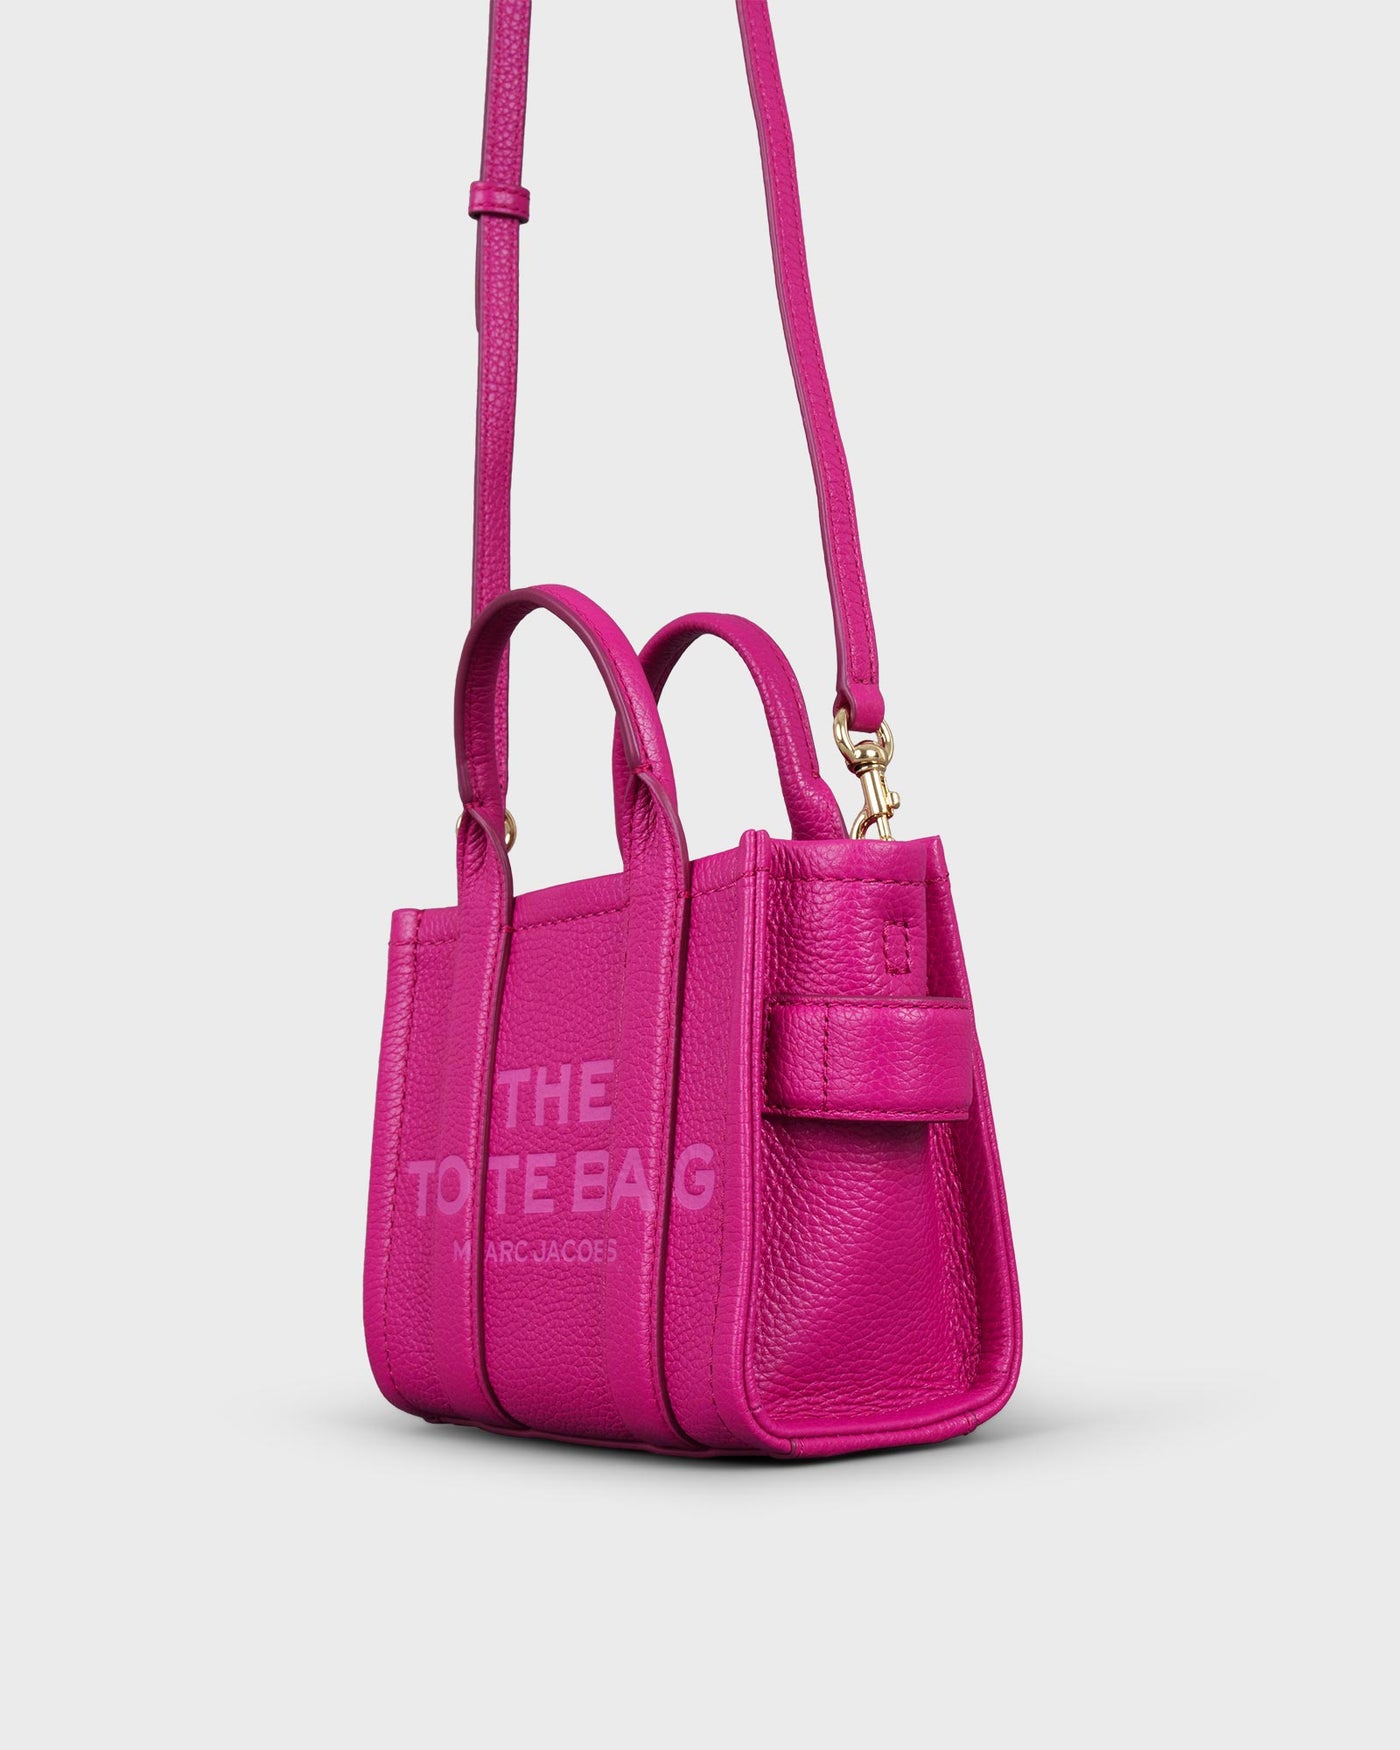 Marc Jacobs Umhängetasche The Leather Mini Tote Bag Lipstick Pink myMEID